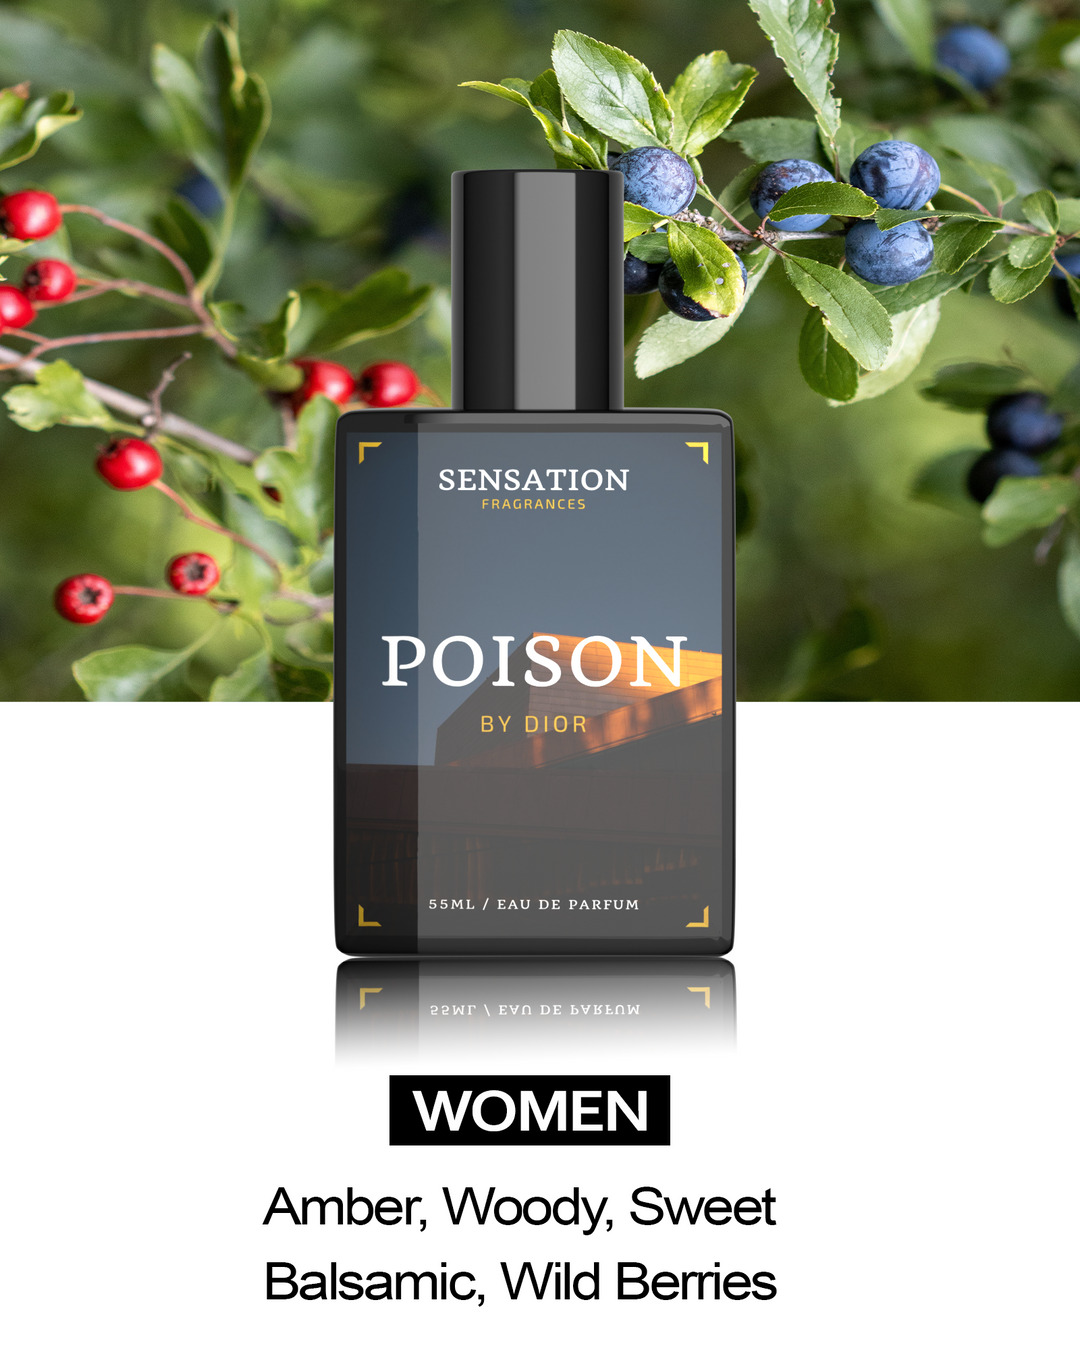 Our Impression Of Poison for women